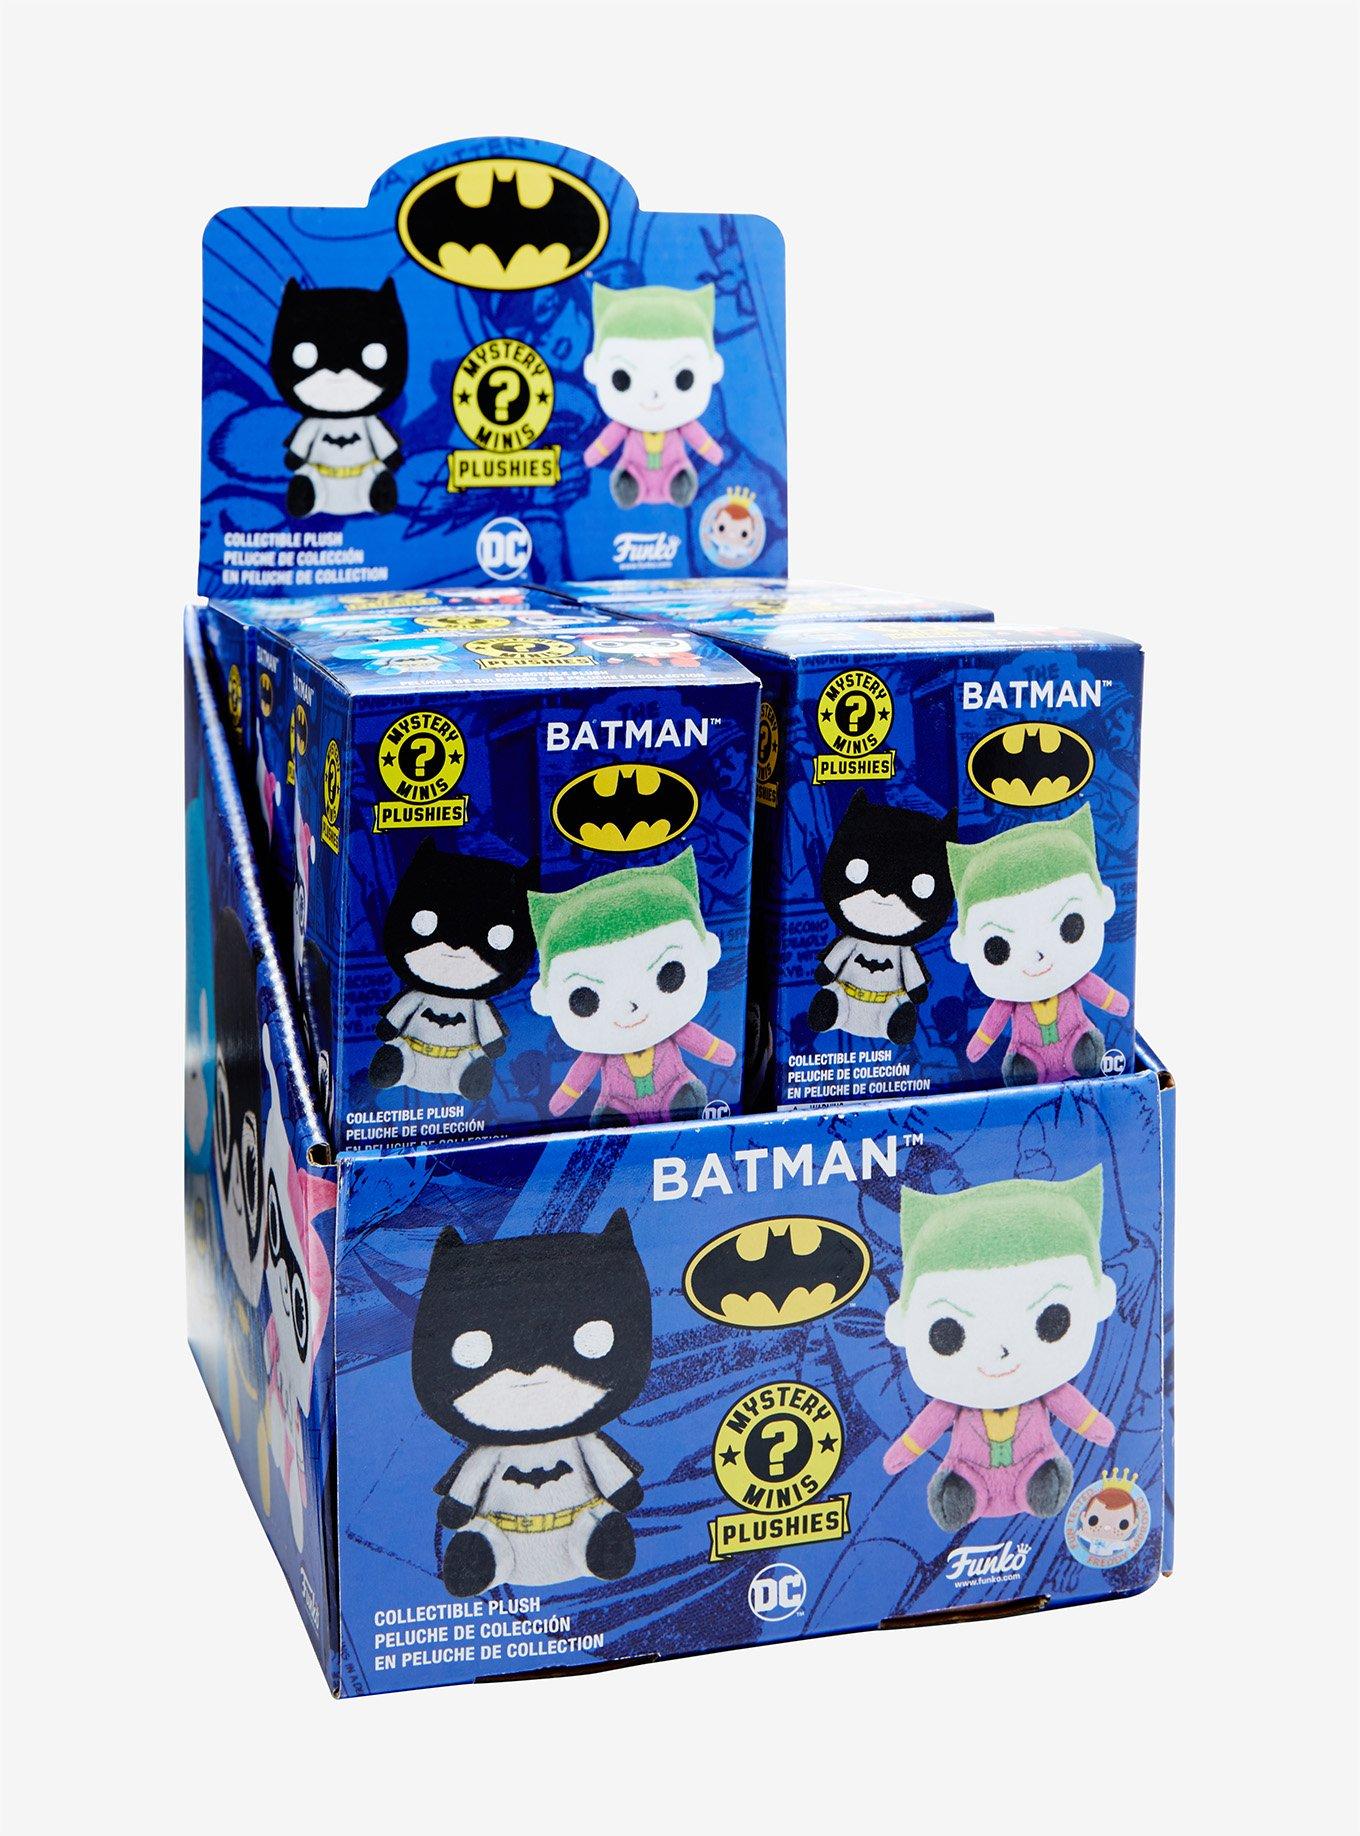 4 x BATMAN FUNKO MYSTERY MINIS PLUSHIES COLLECTABLE PLUSH BLIND BOXES BRAND NEW 